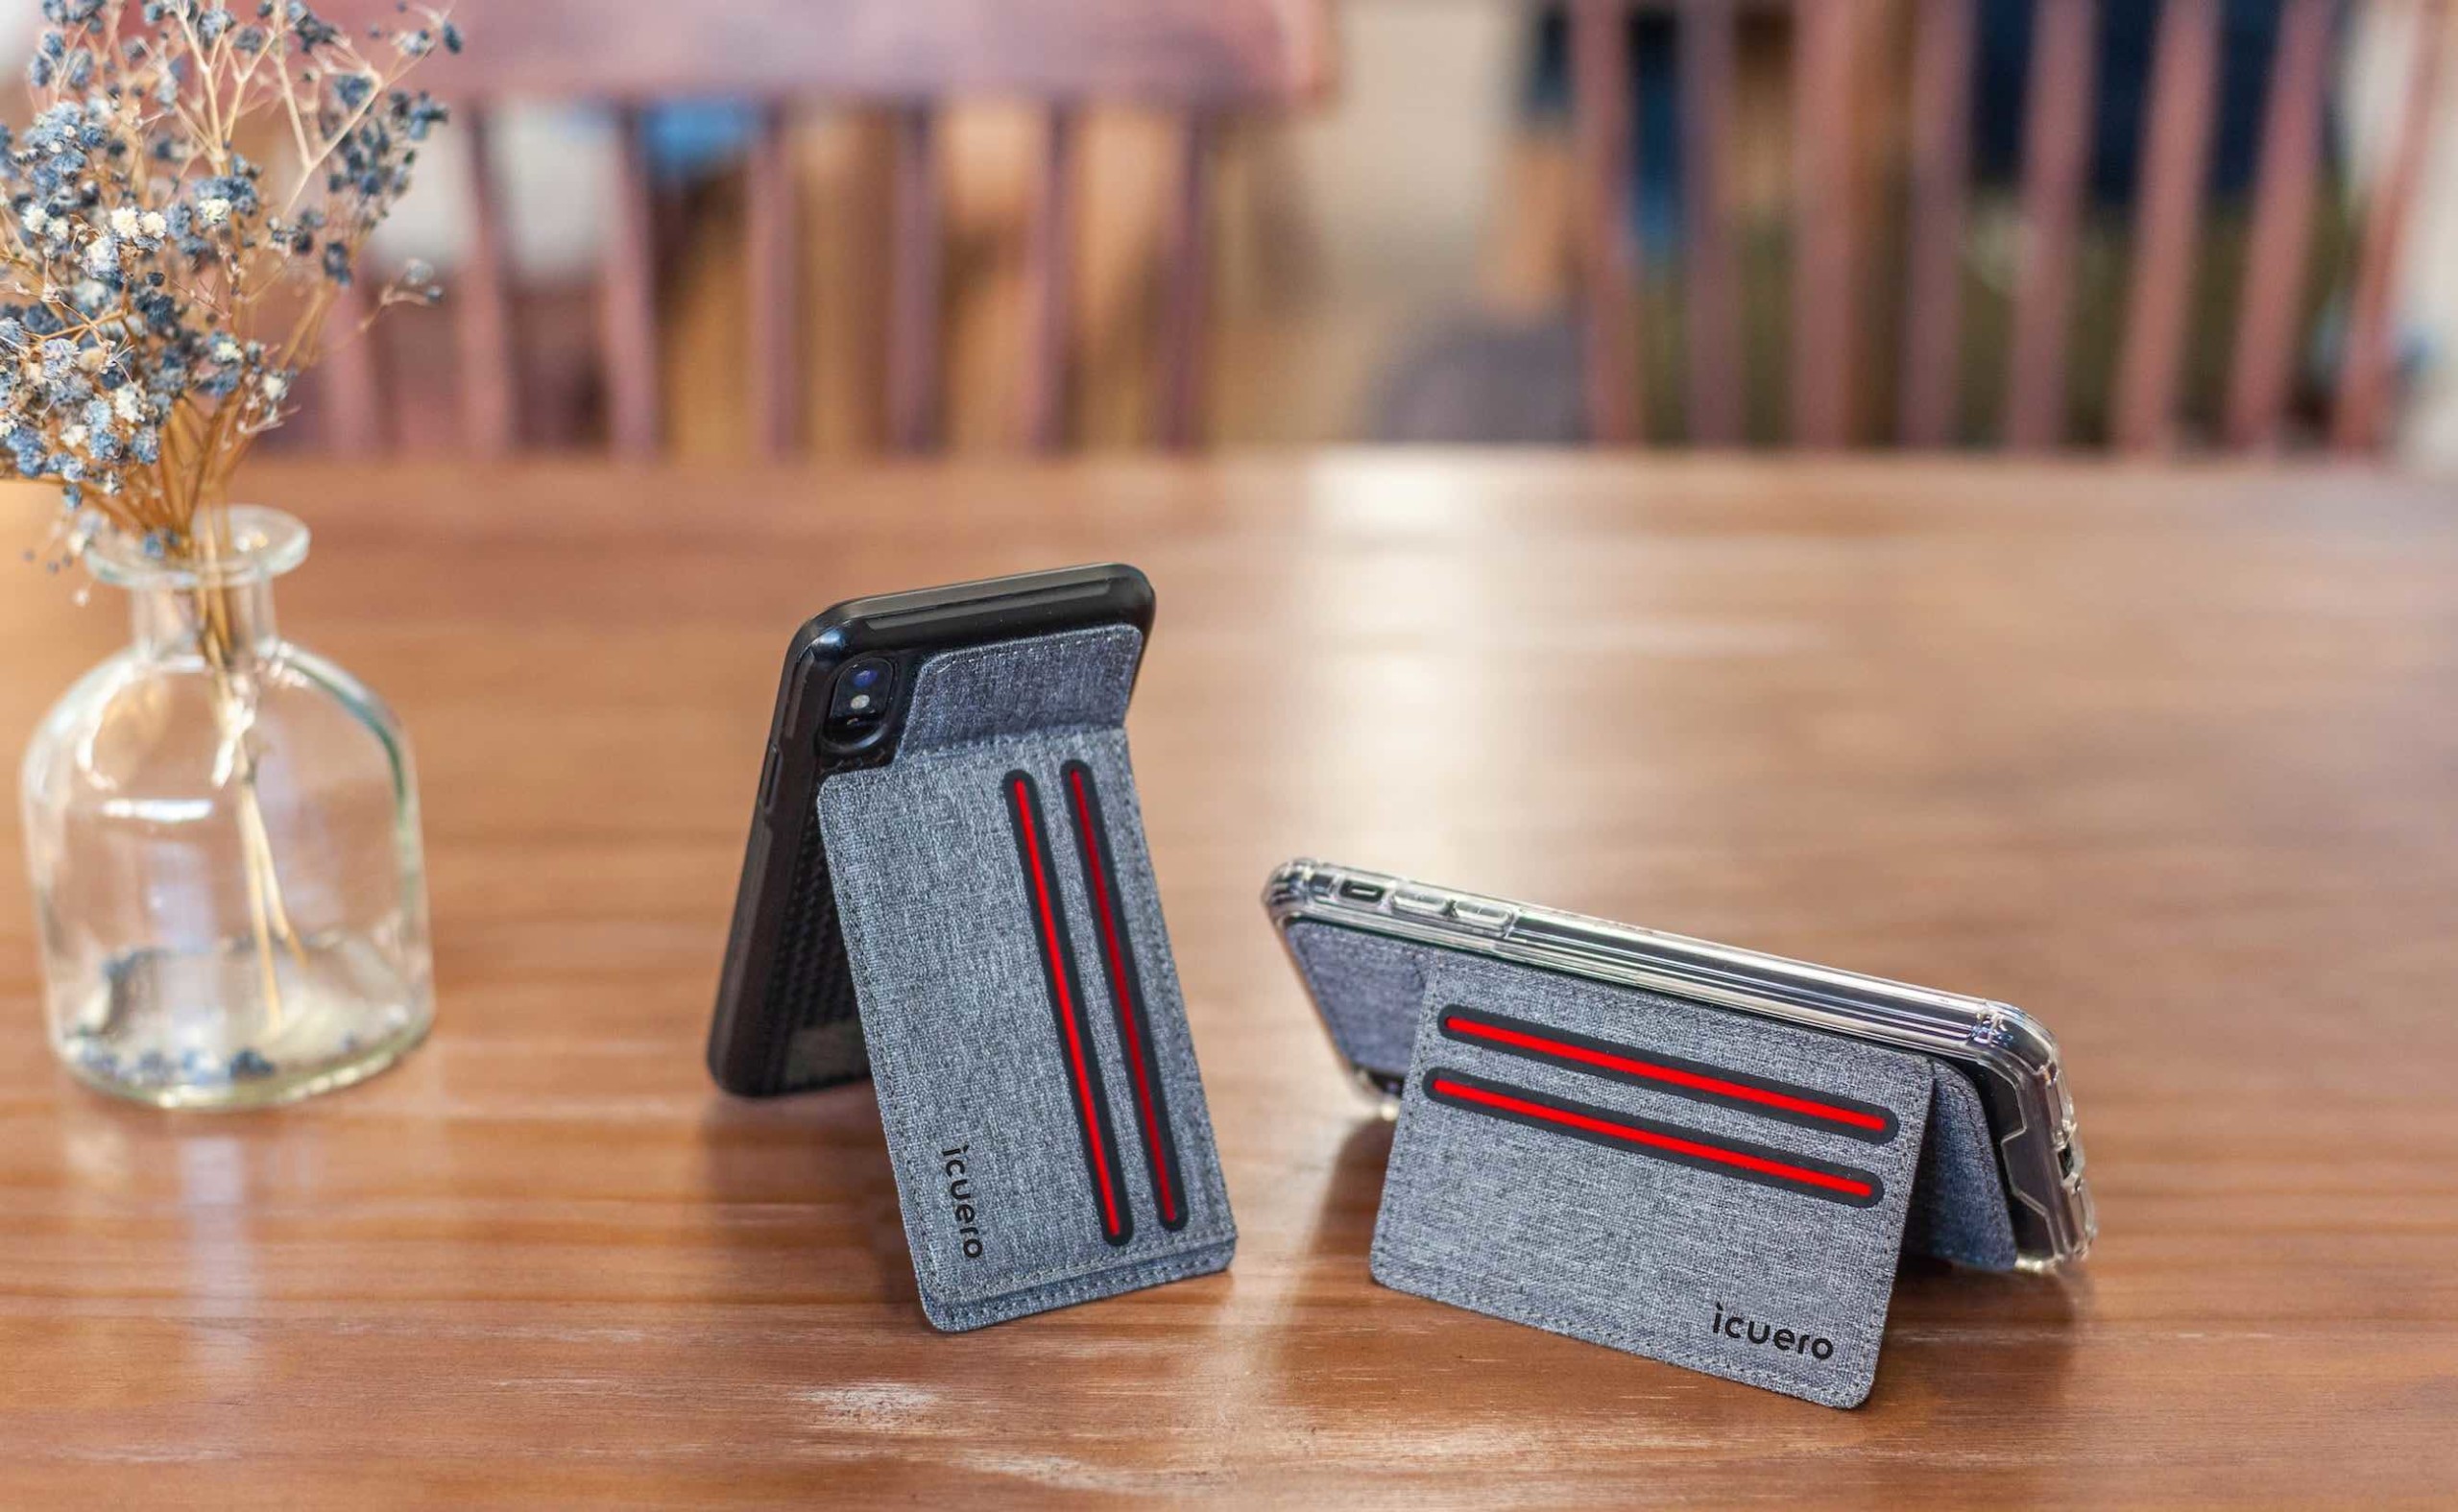 icuero Neck-Saving Smartphone Wallet Stand sticks to the back of your phone for hands-free use